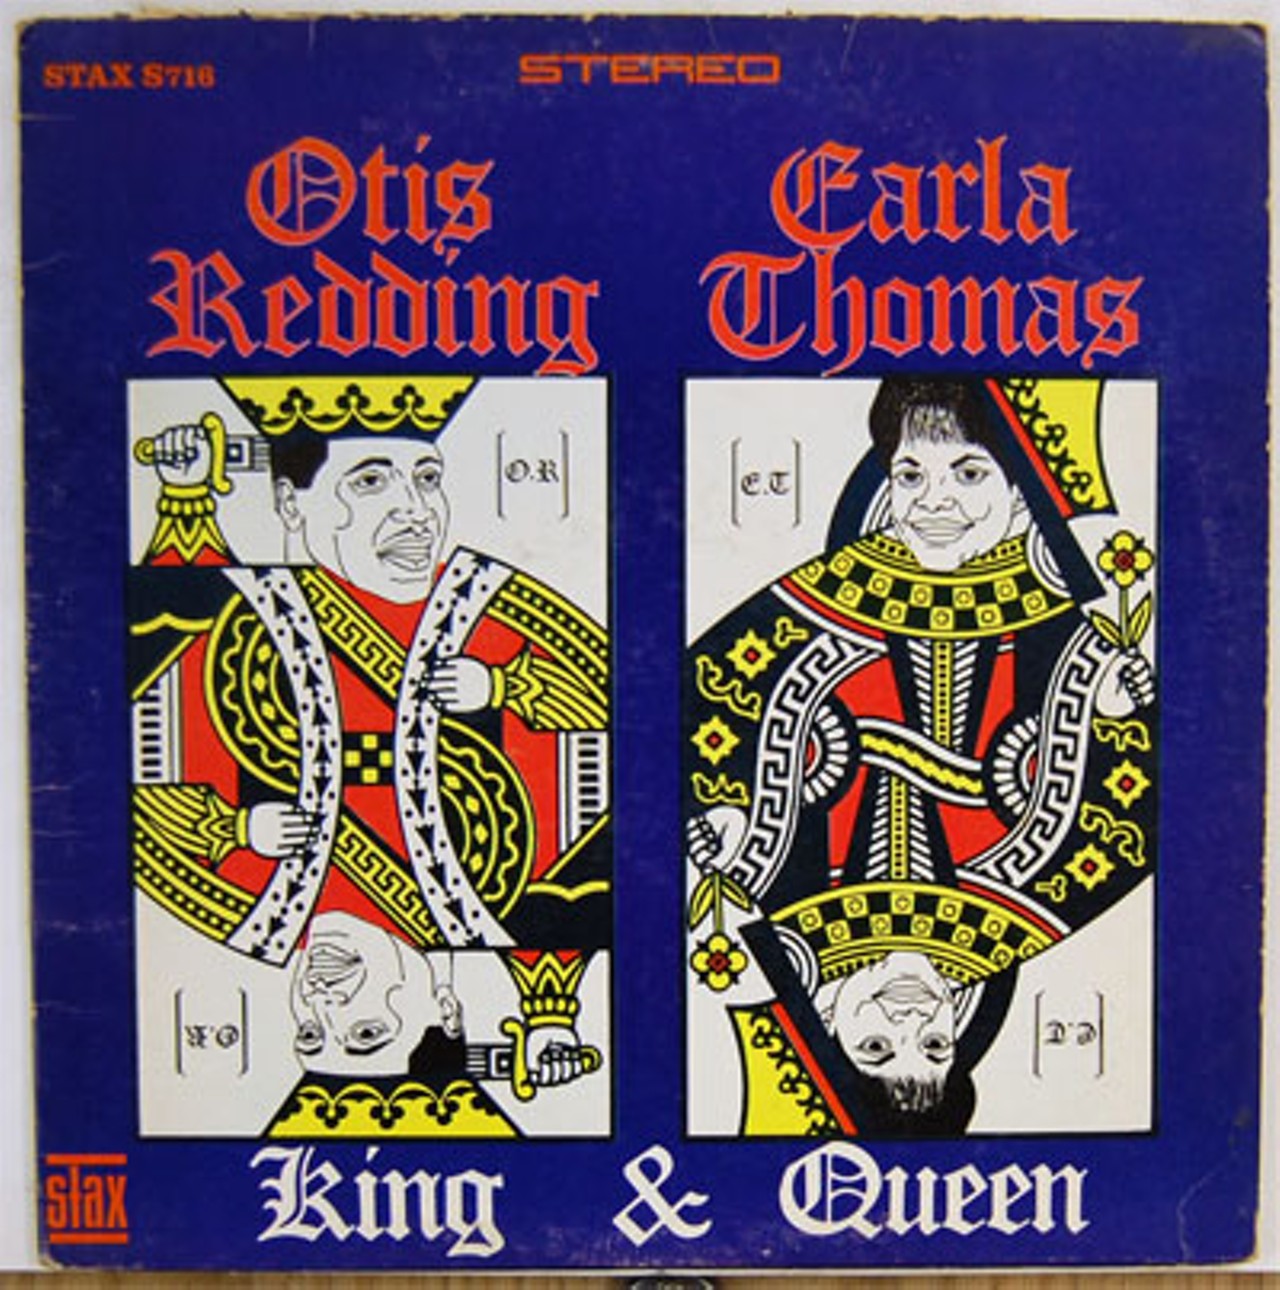 Otis Redding and Carla Thomas superimposed cartoon versions of their faces on these royal playing cards. And why not?Read "Voices Carry: Shirley Brown, the forgotten soul sister, sings on," by Roy Kasten.